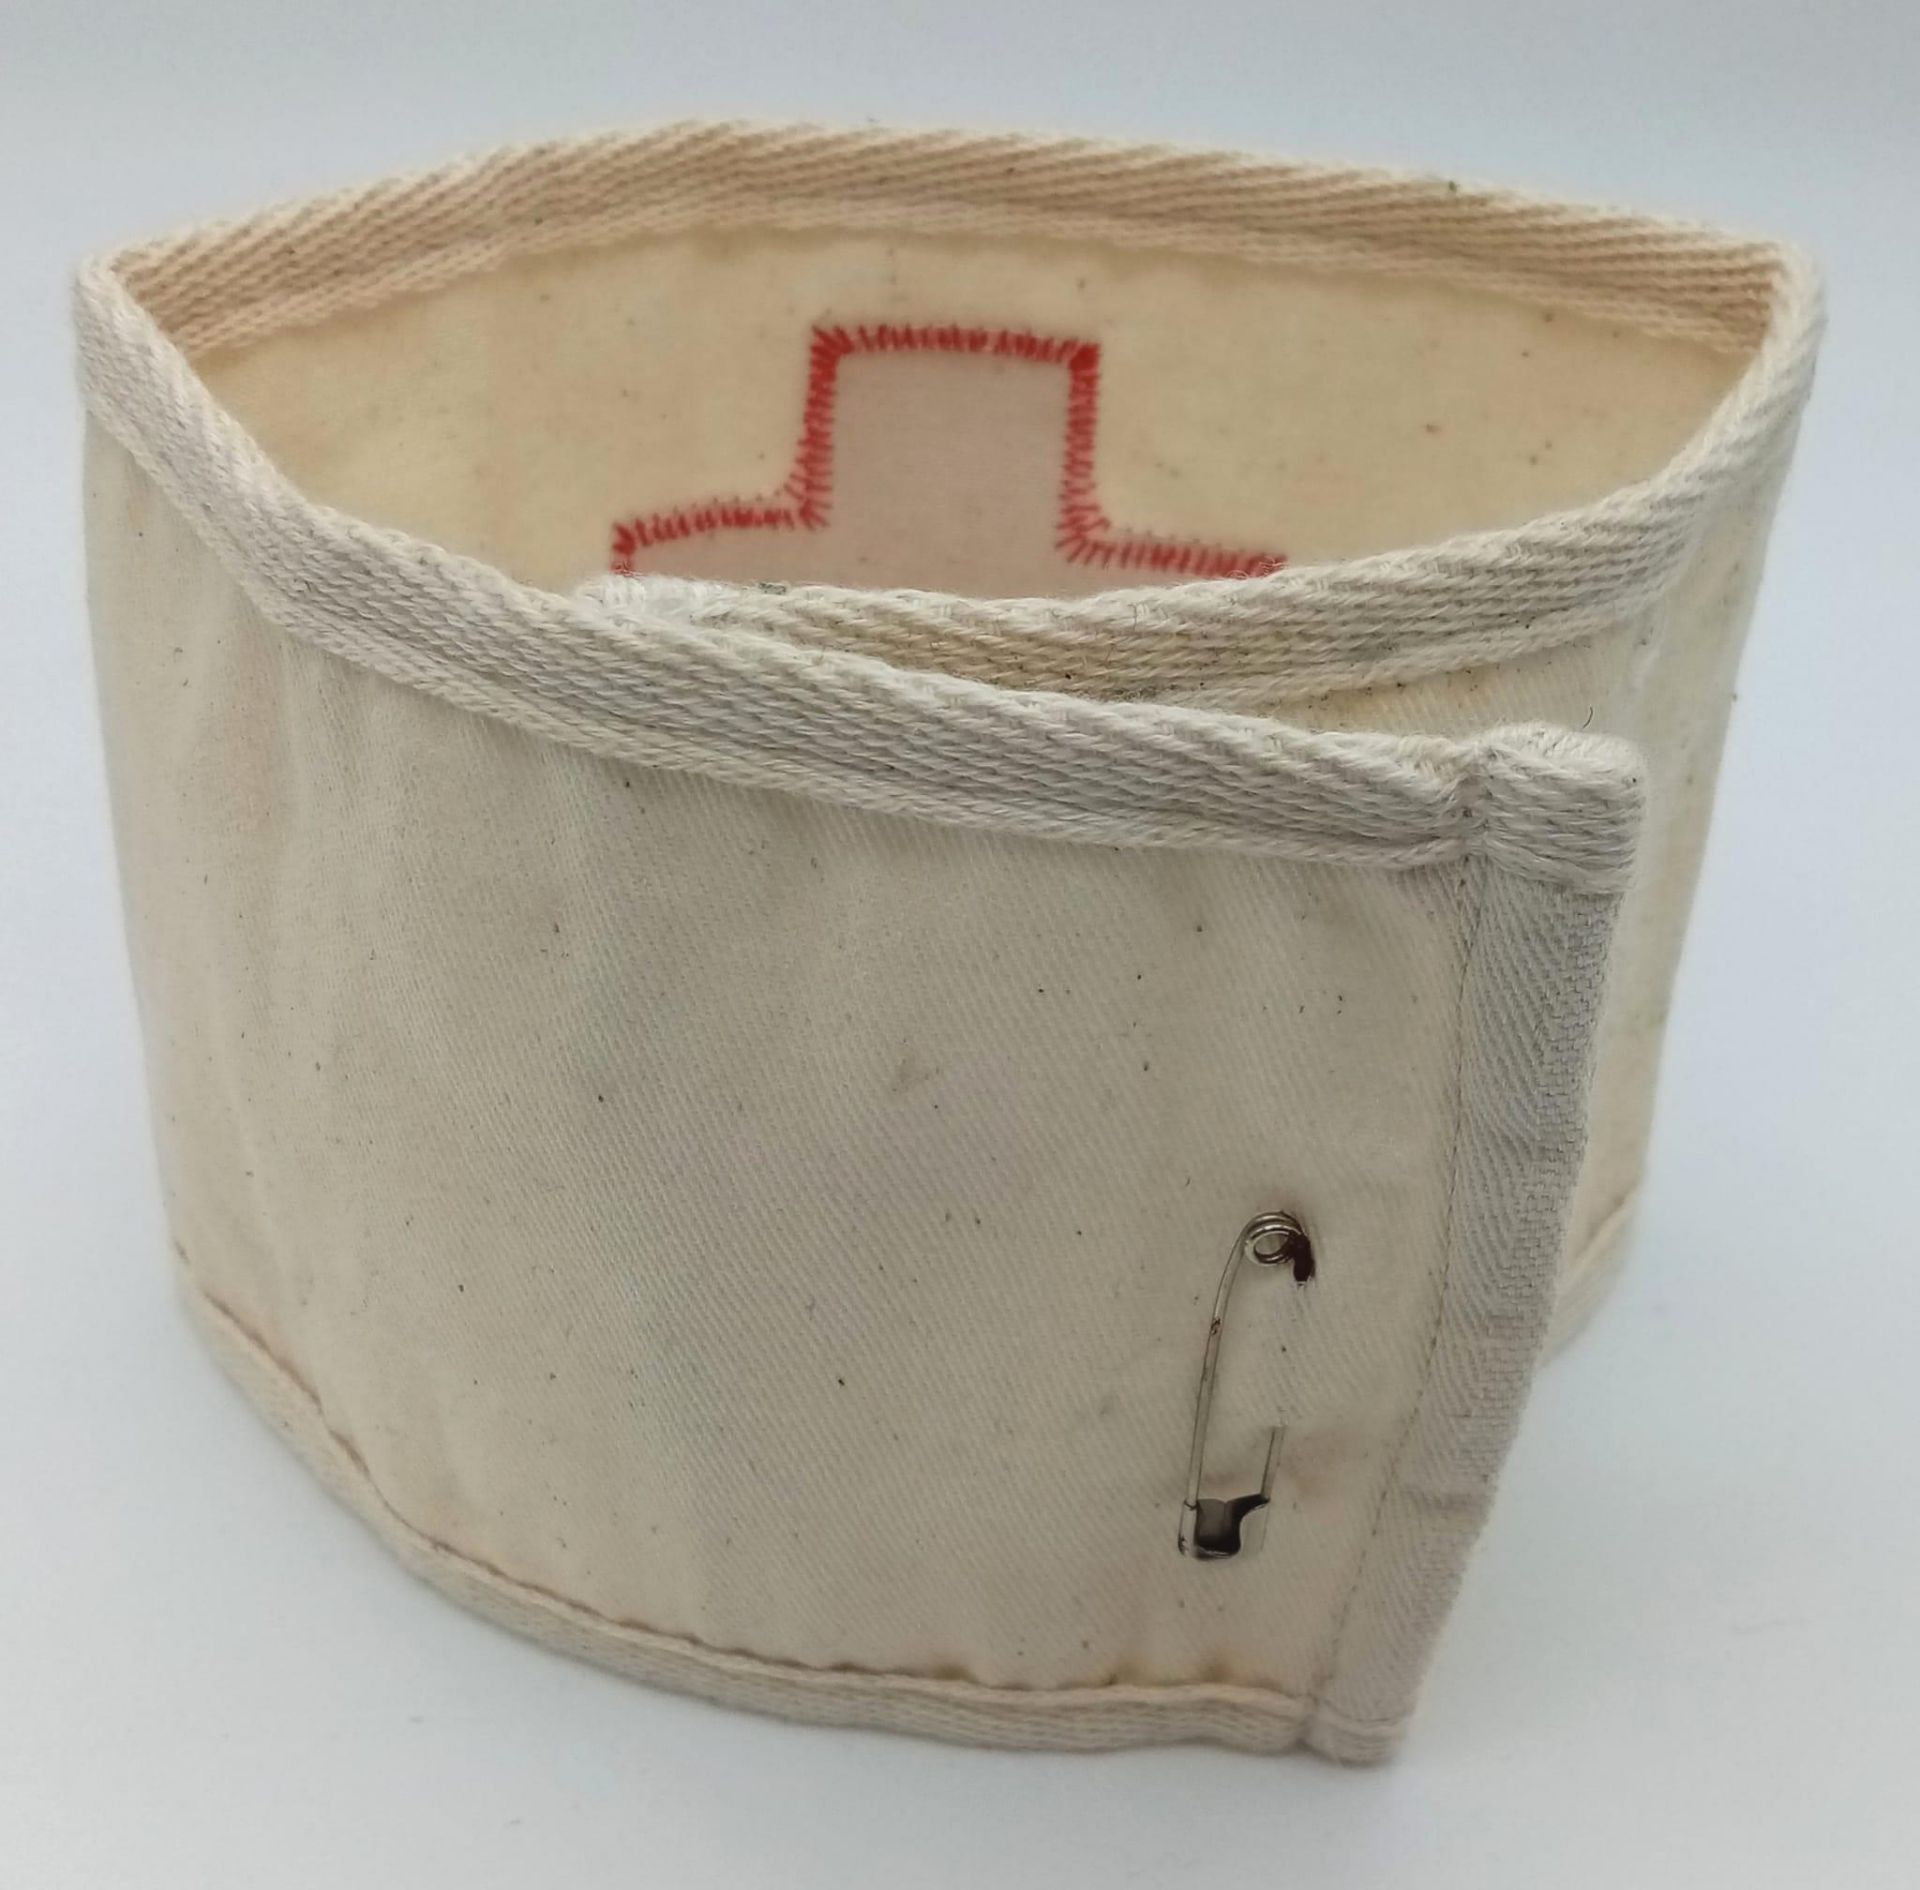 WW2 US Medics Armband with US Medical Department Stamp. Un-issued condition. - Bild 2 aus 3